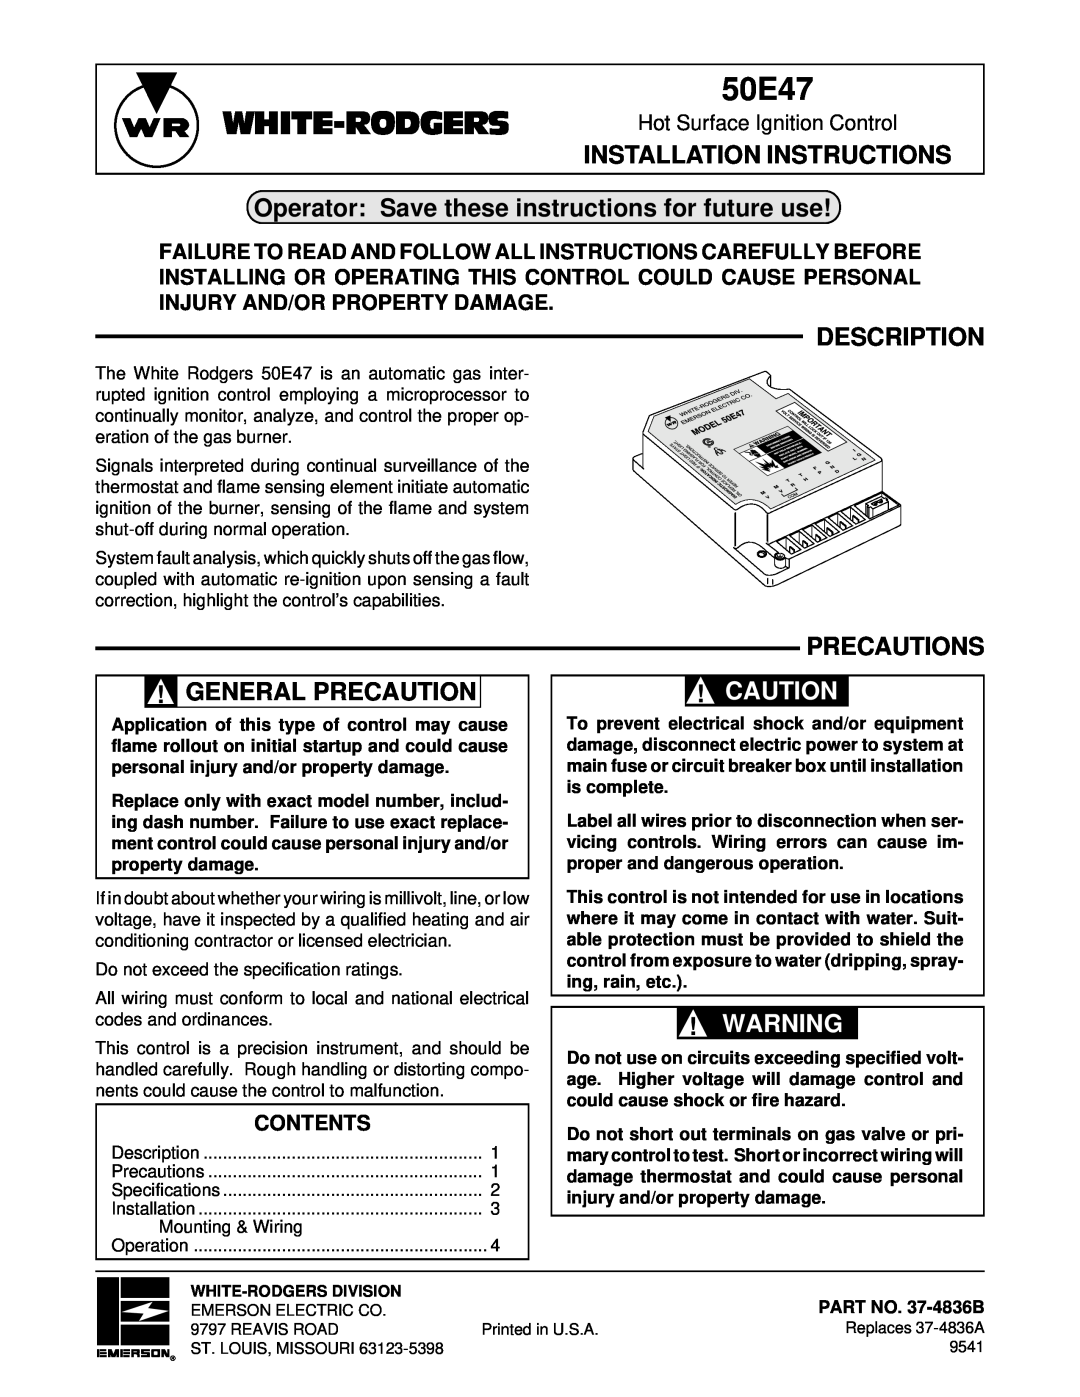 White Rodgers 5.00E+48 installation instructions Operator Save these instructions for future use, Description, Precautions 